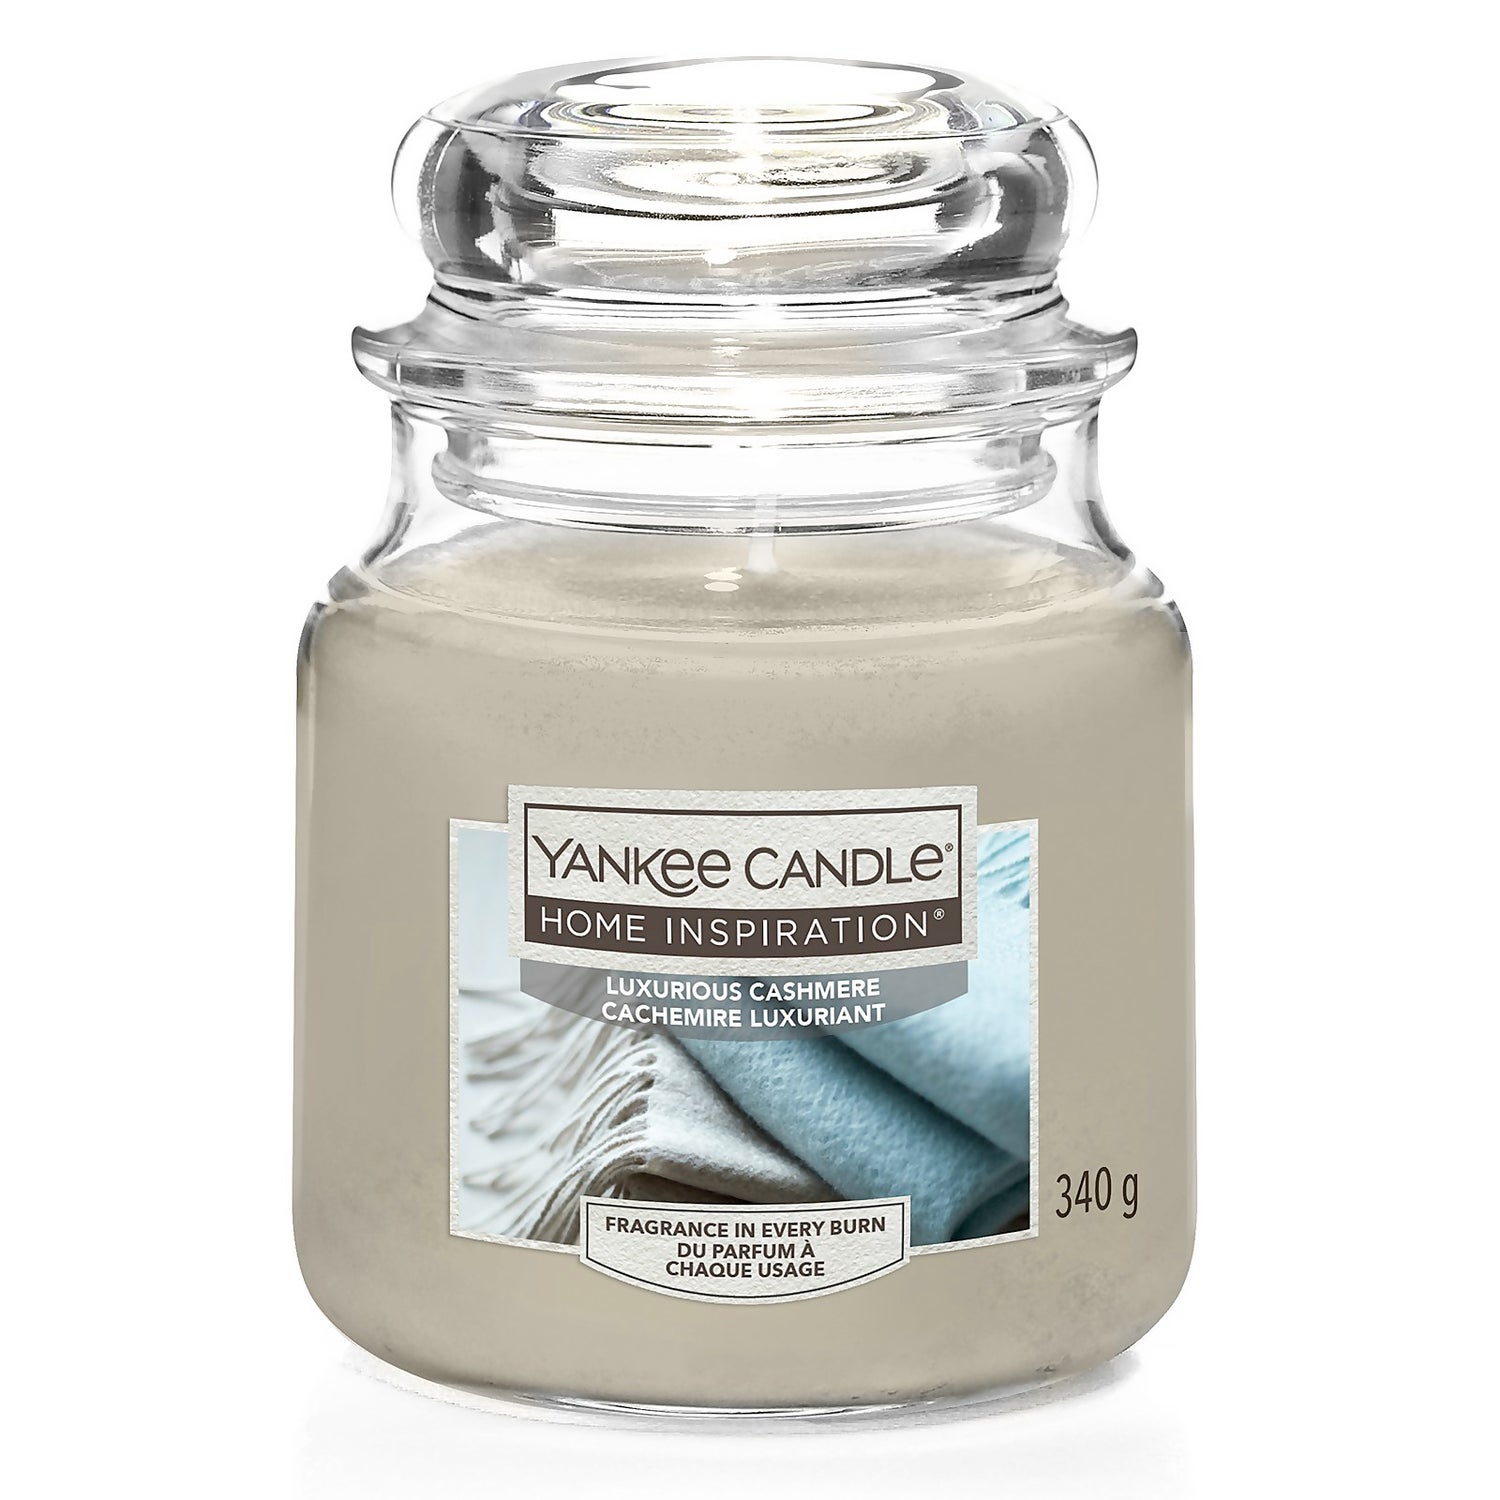 Yankee Candle Home Inspiration Scented Candle - Medium Jar - Luxurious  Cashmere